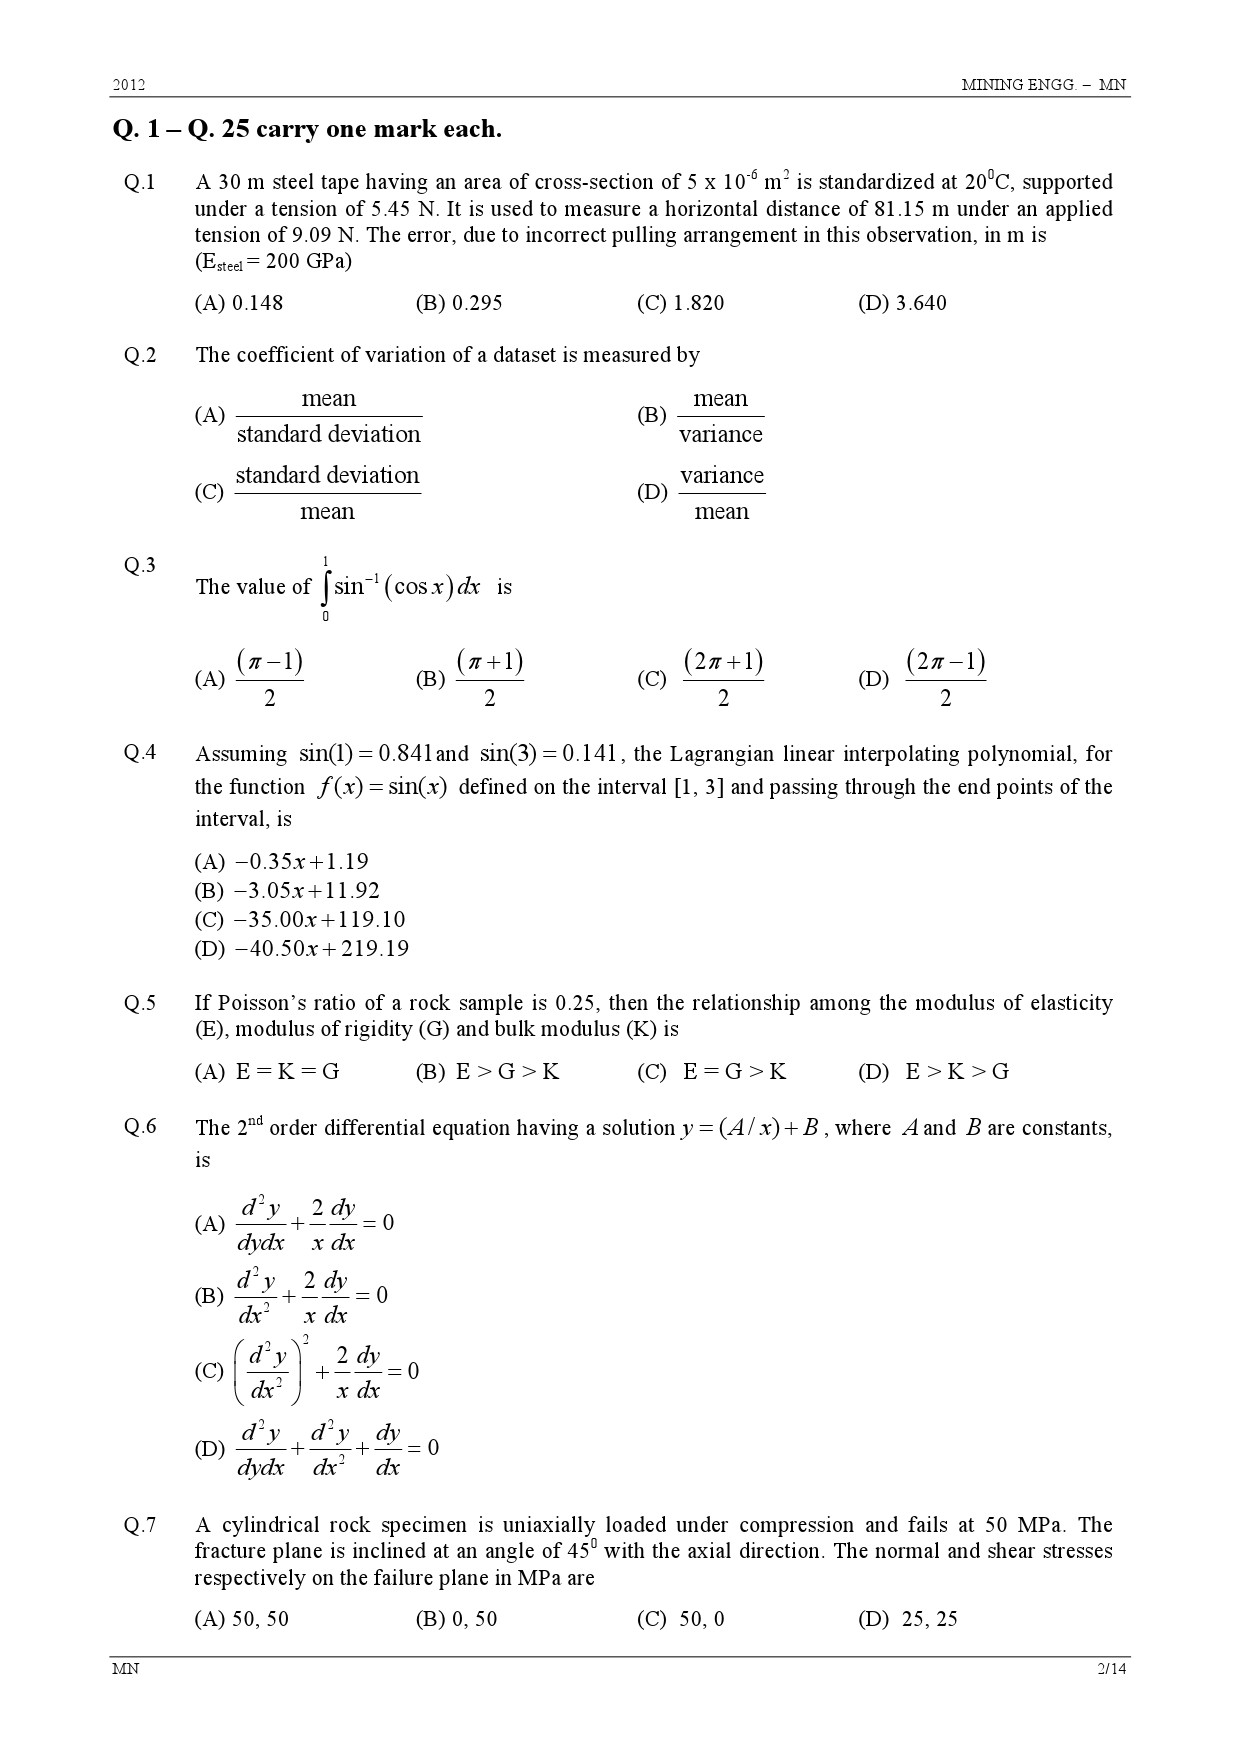 GATE Exam Question Paper 2012 Mining Engineering 2